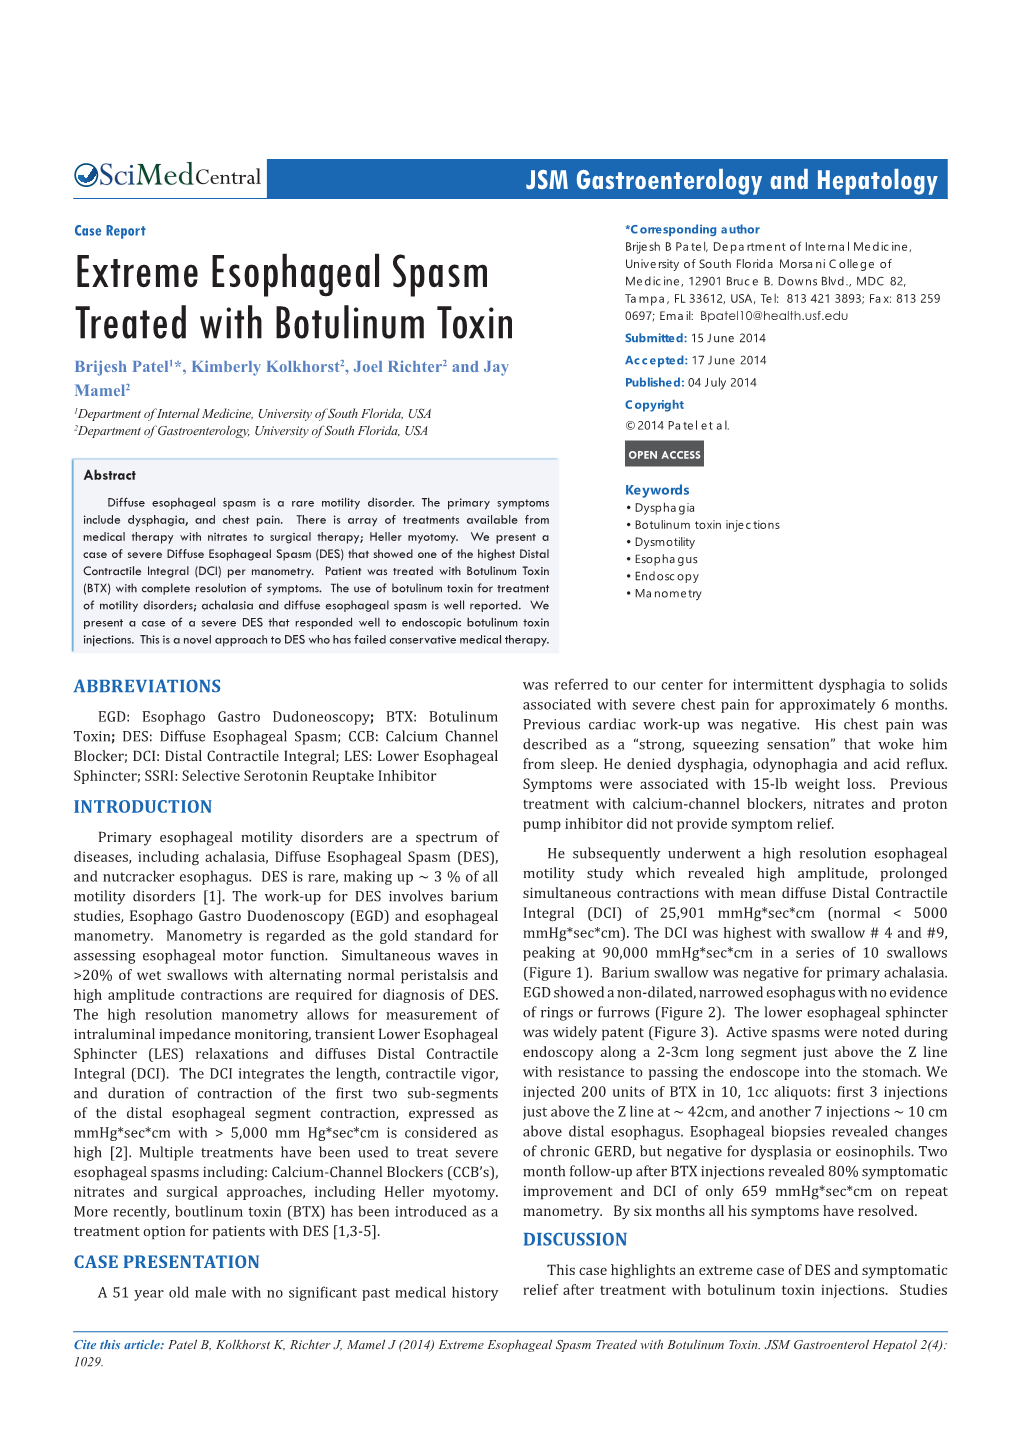 Extreme Esophageal Spasm Treated with Botulinum Toxin